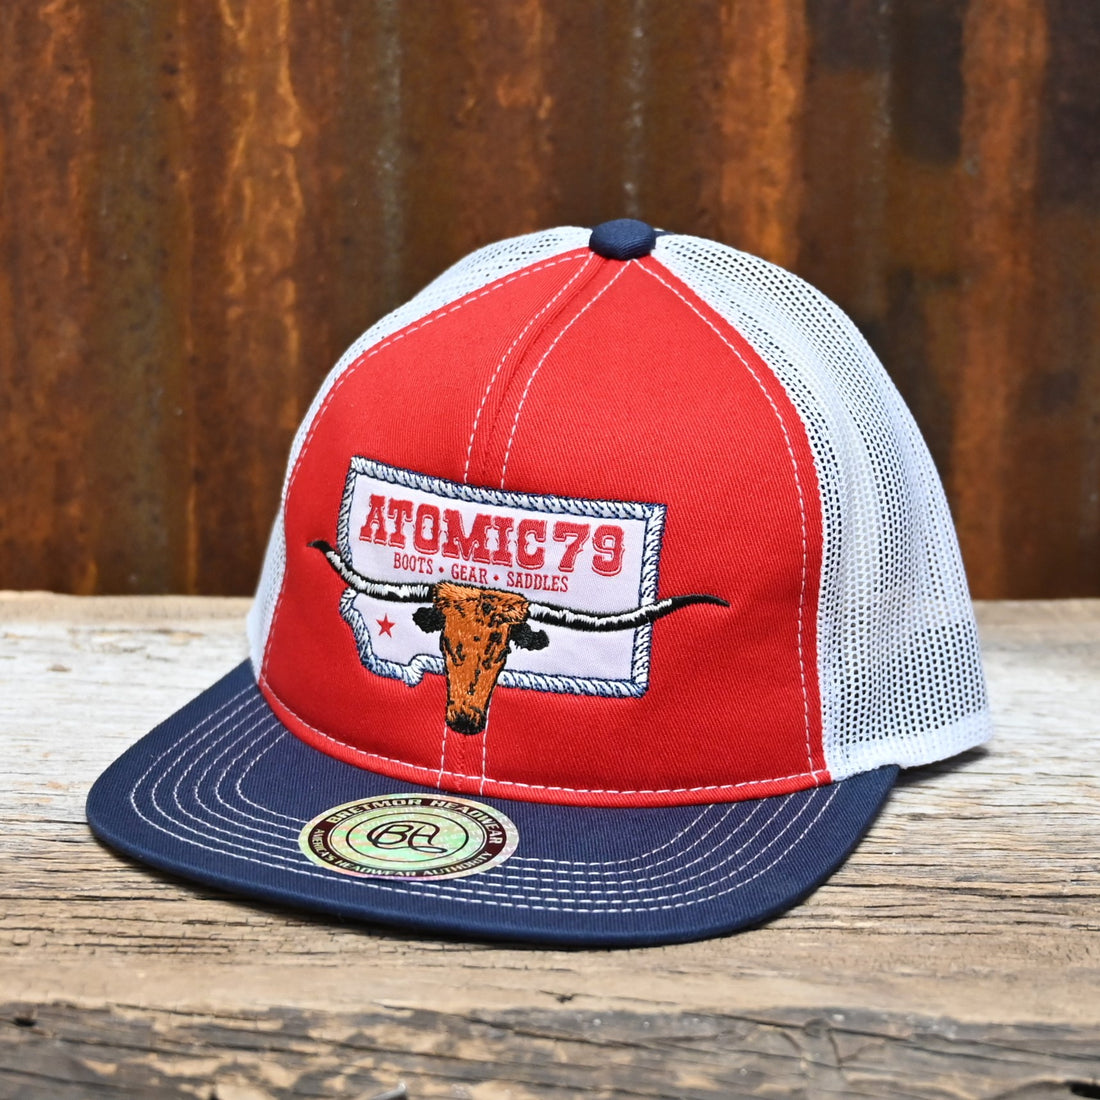 Atomic 79 Mesh Cap in Red White and Blue with Logo view of hat